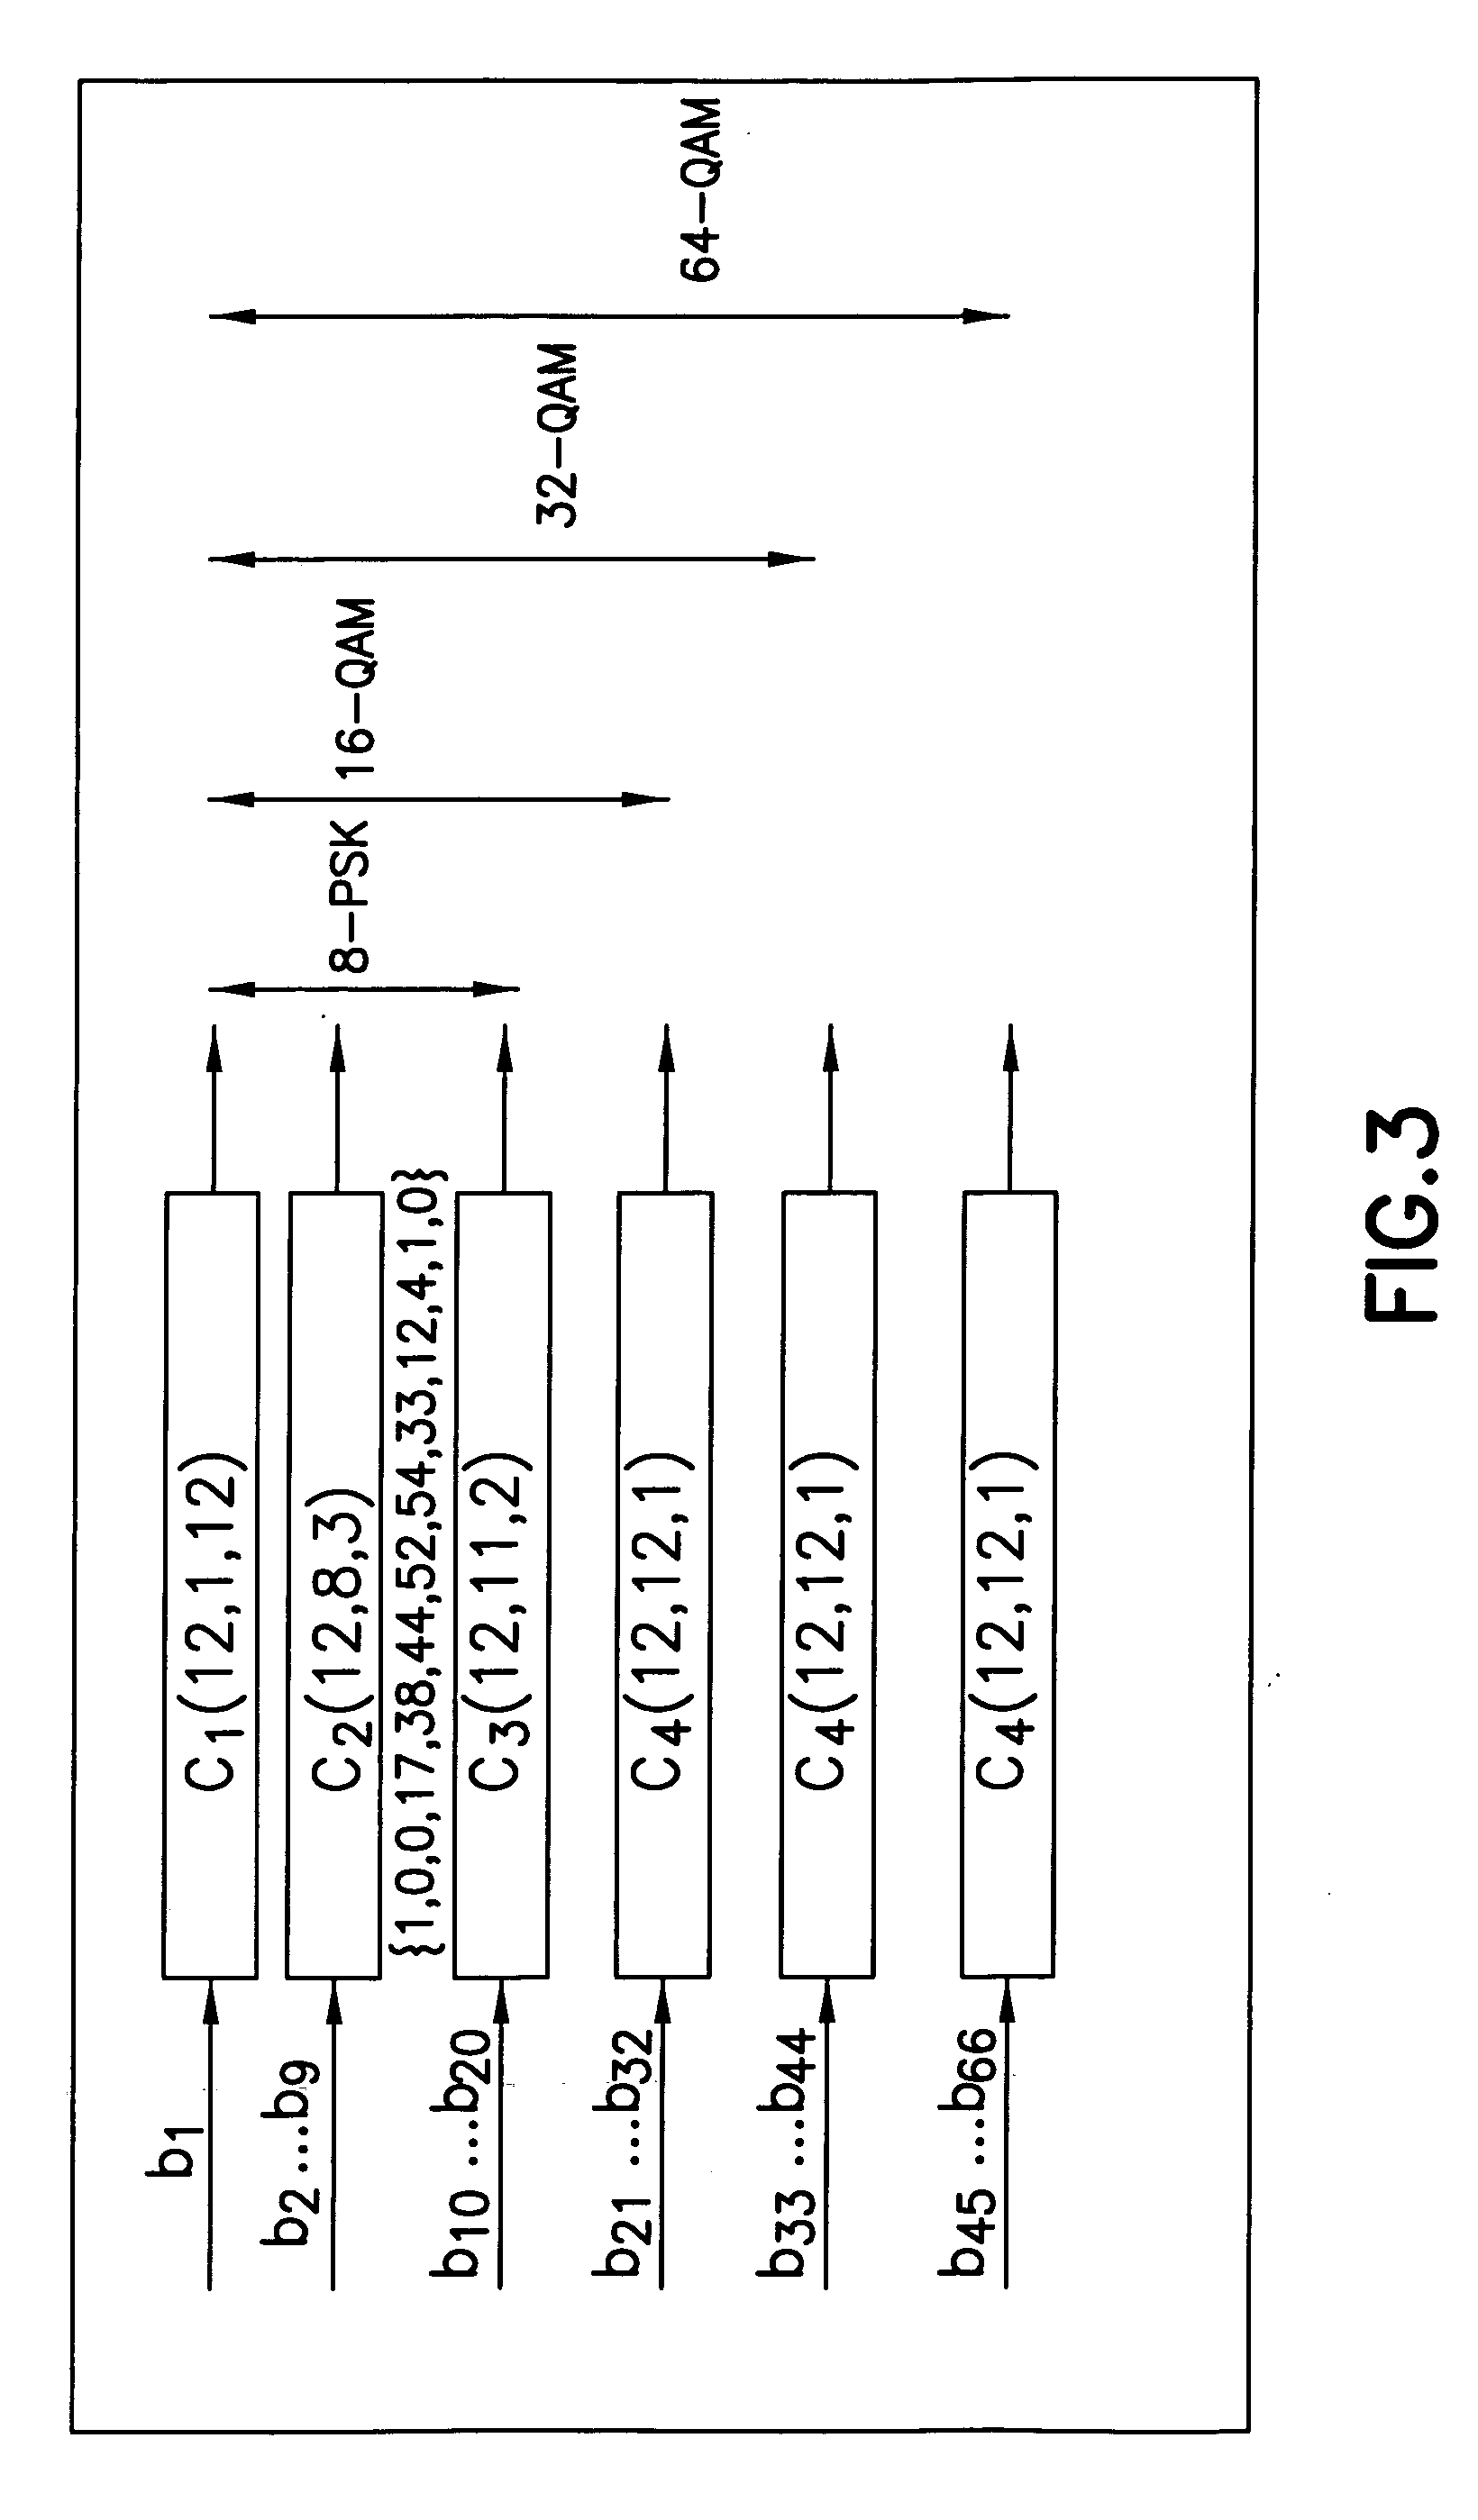 Adaptive multilevel block coded modulation for OFDM systems